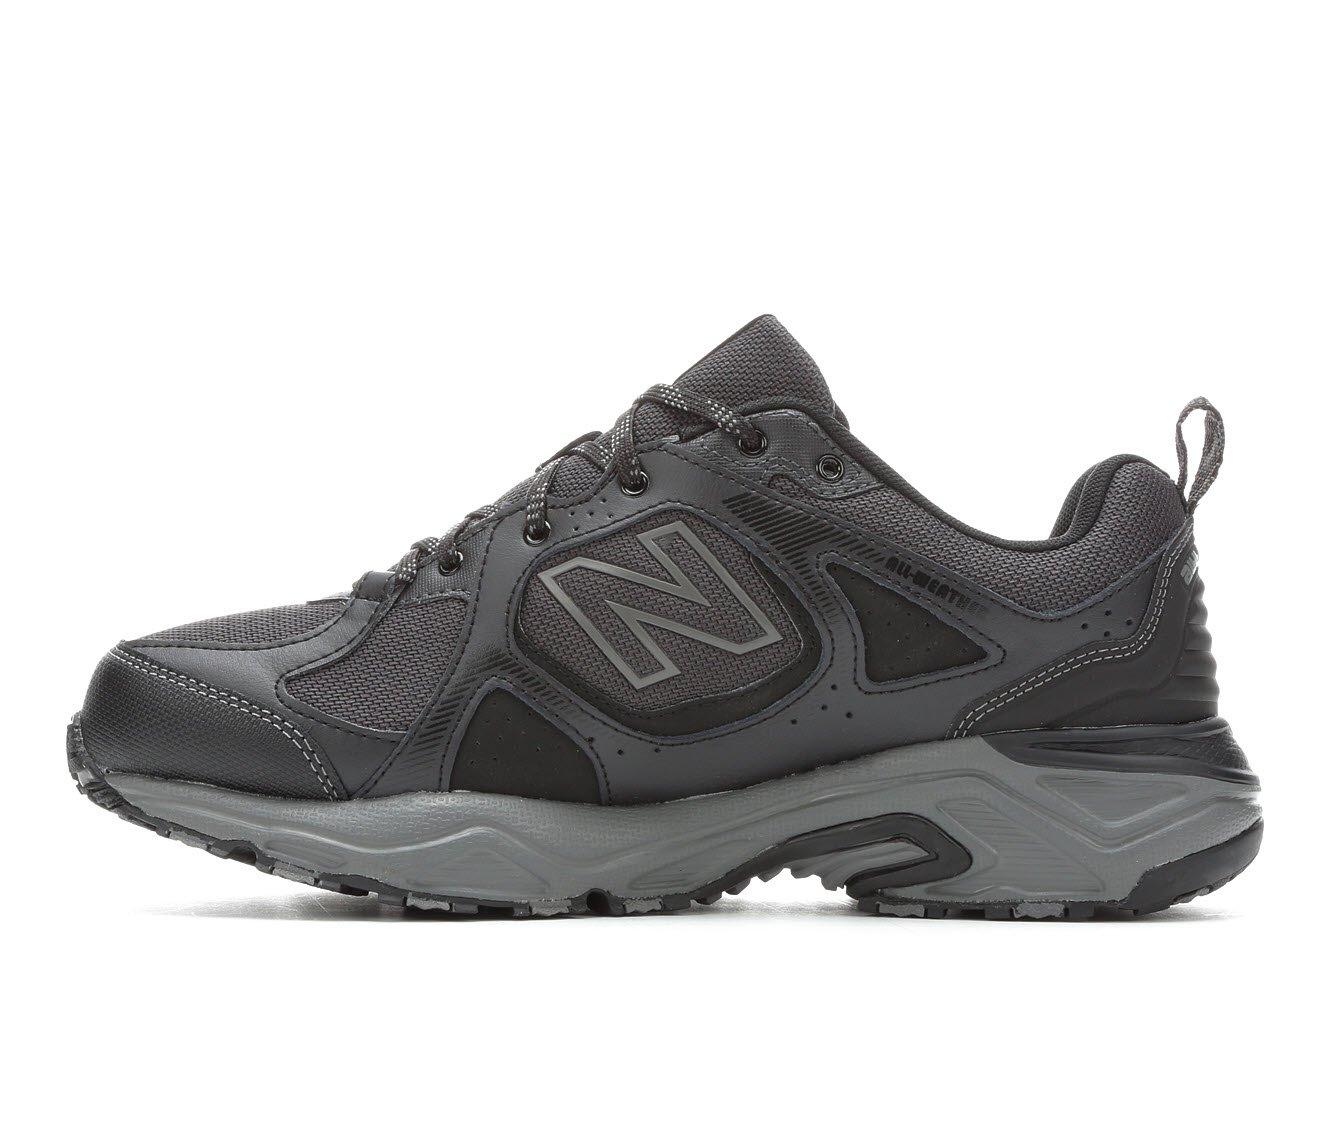 New Balance MT481 Trail Running Shoes